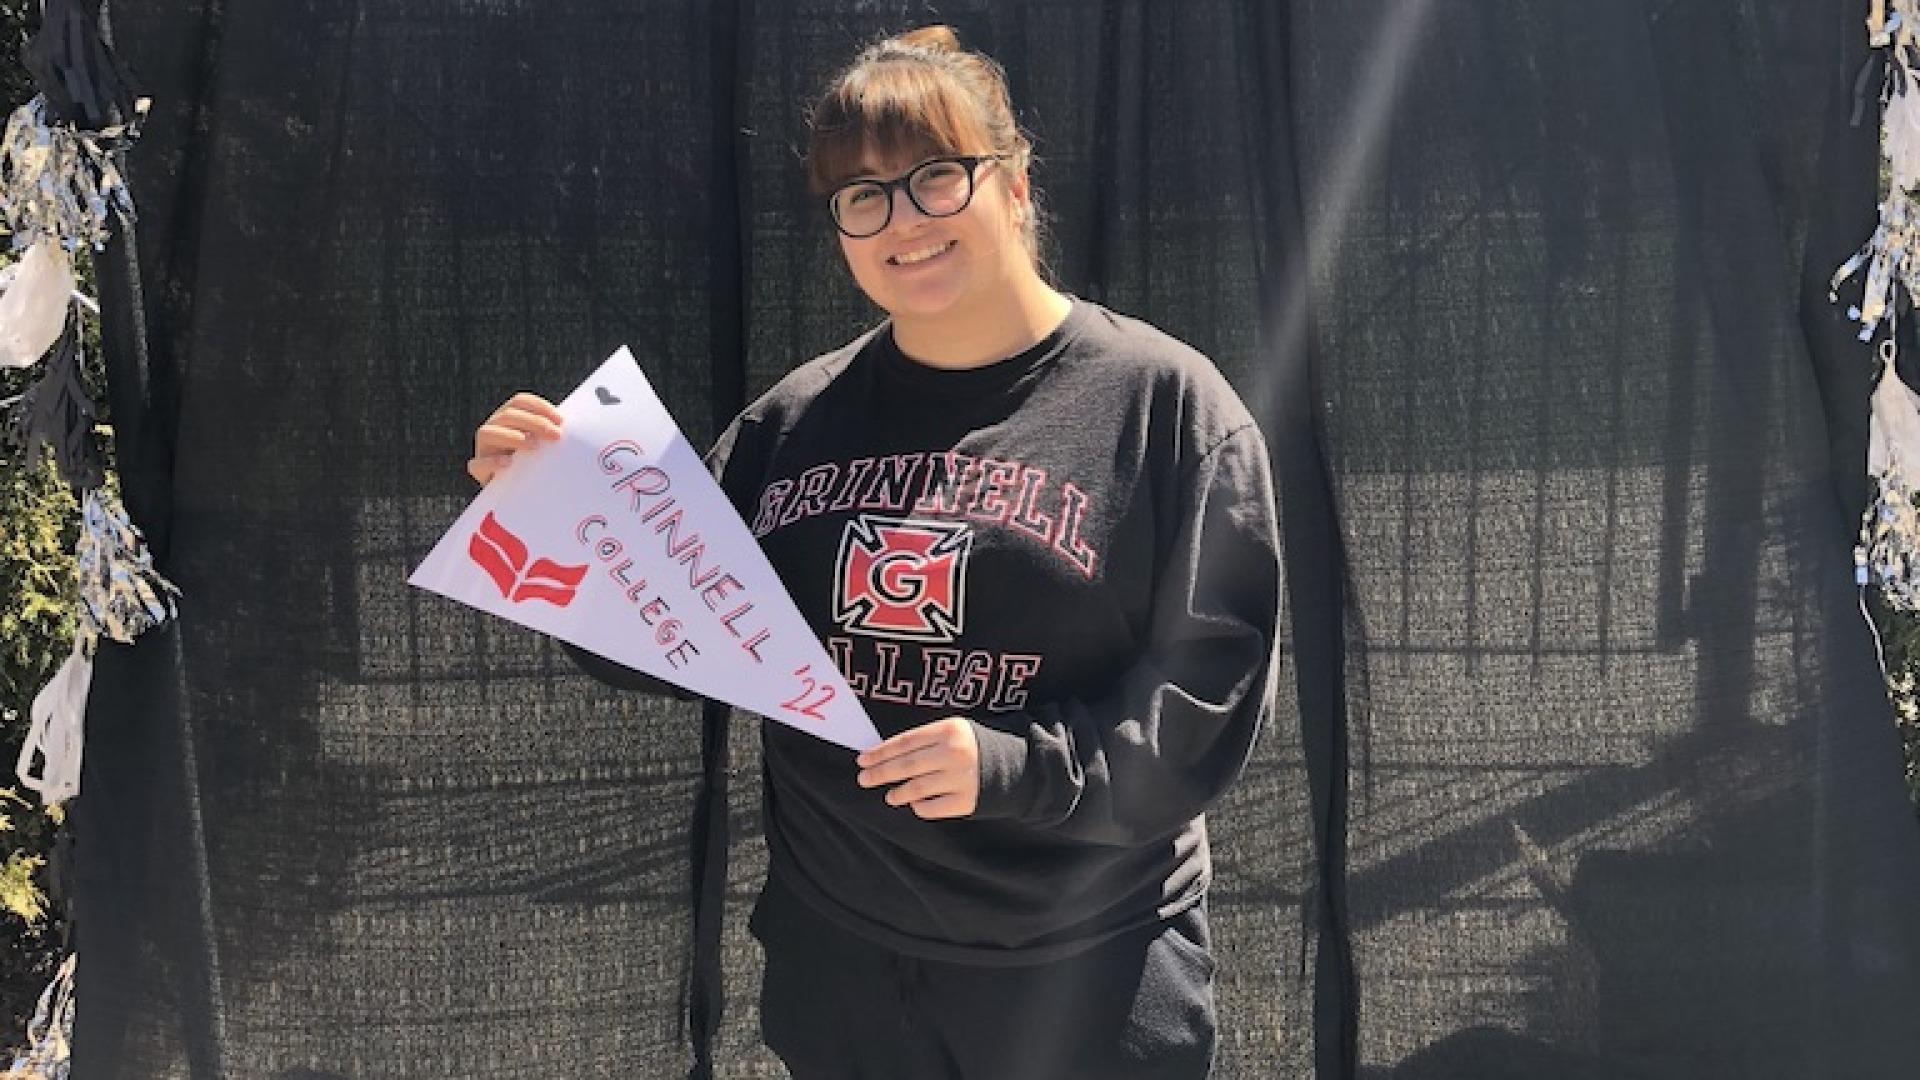 Eva in a Grinnell College sweatshirt holding a hand-lettered Grinnell College pennant in front of a background reading Congrats